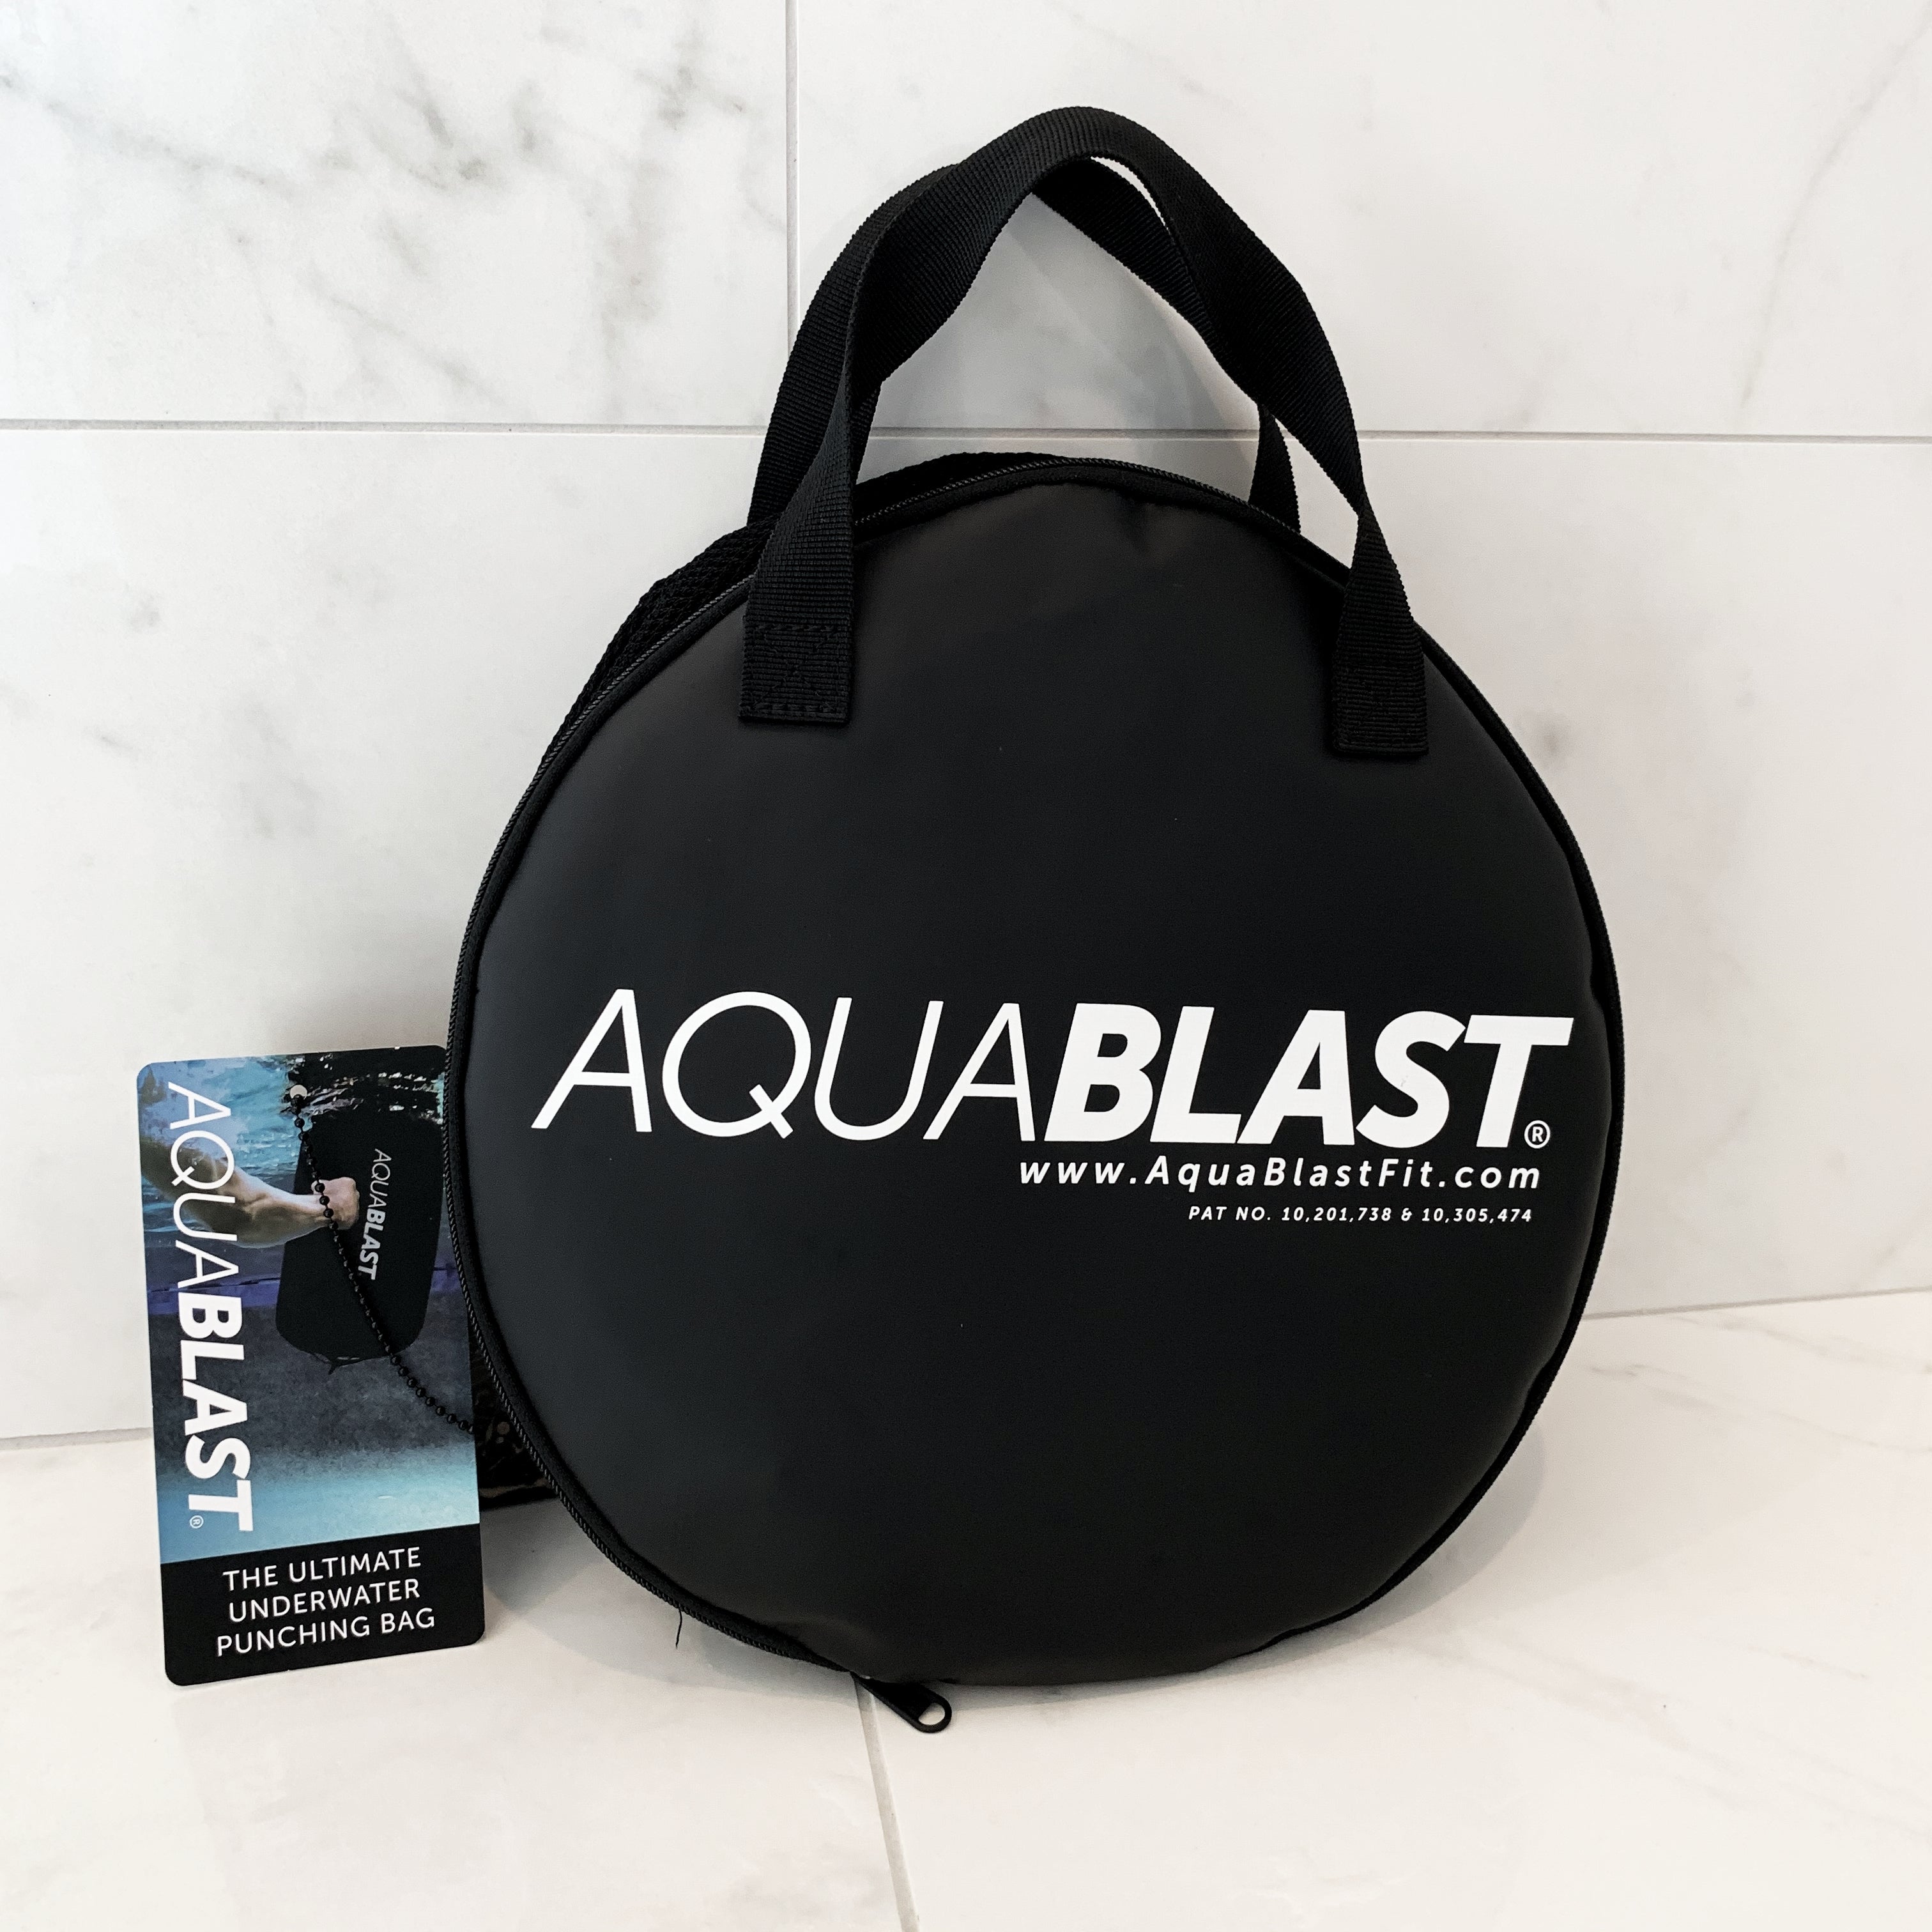 Setup AquaBLAST in the pool in about 1 minute.